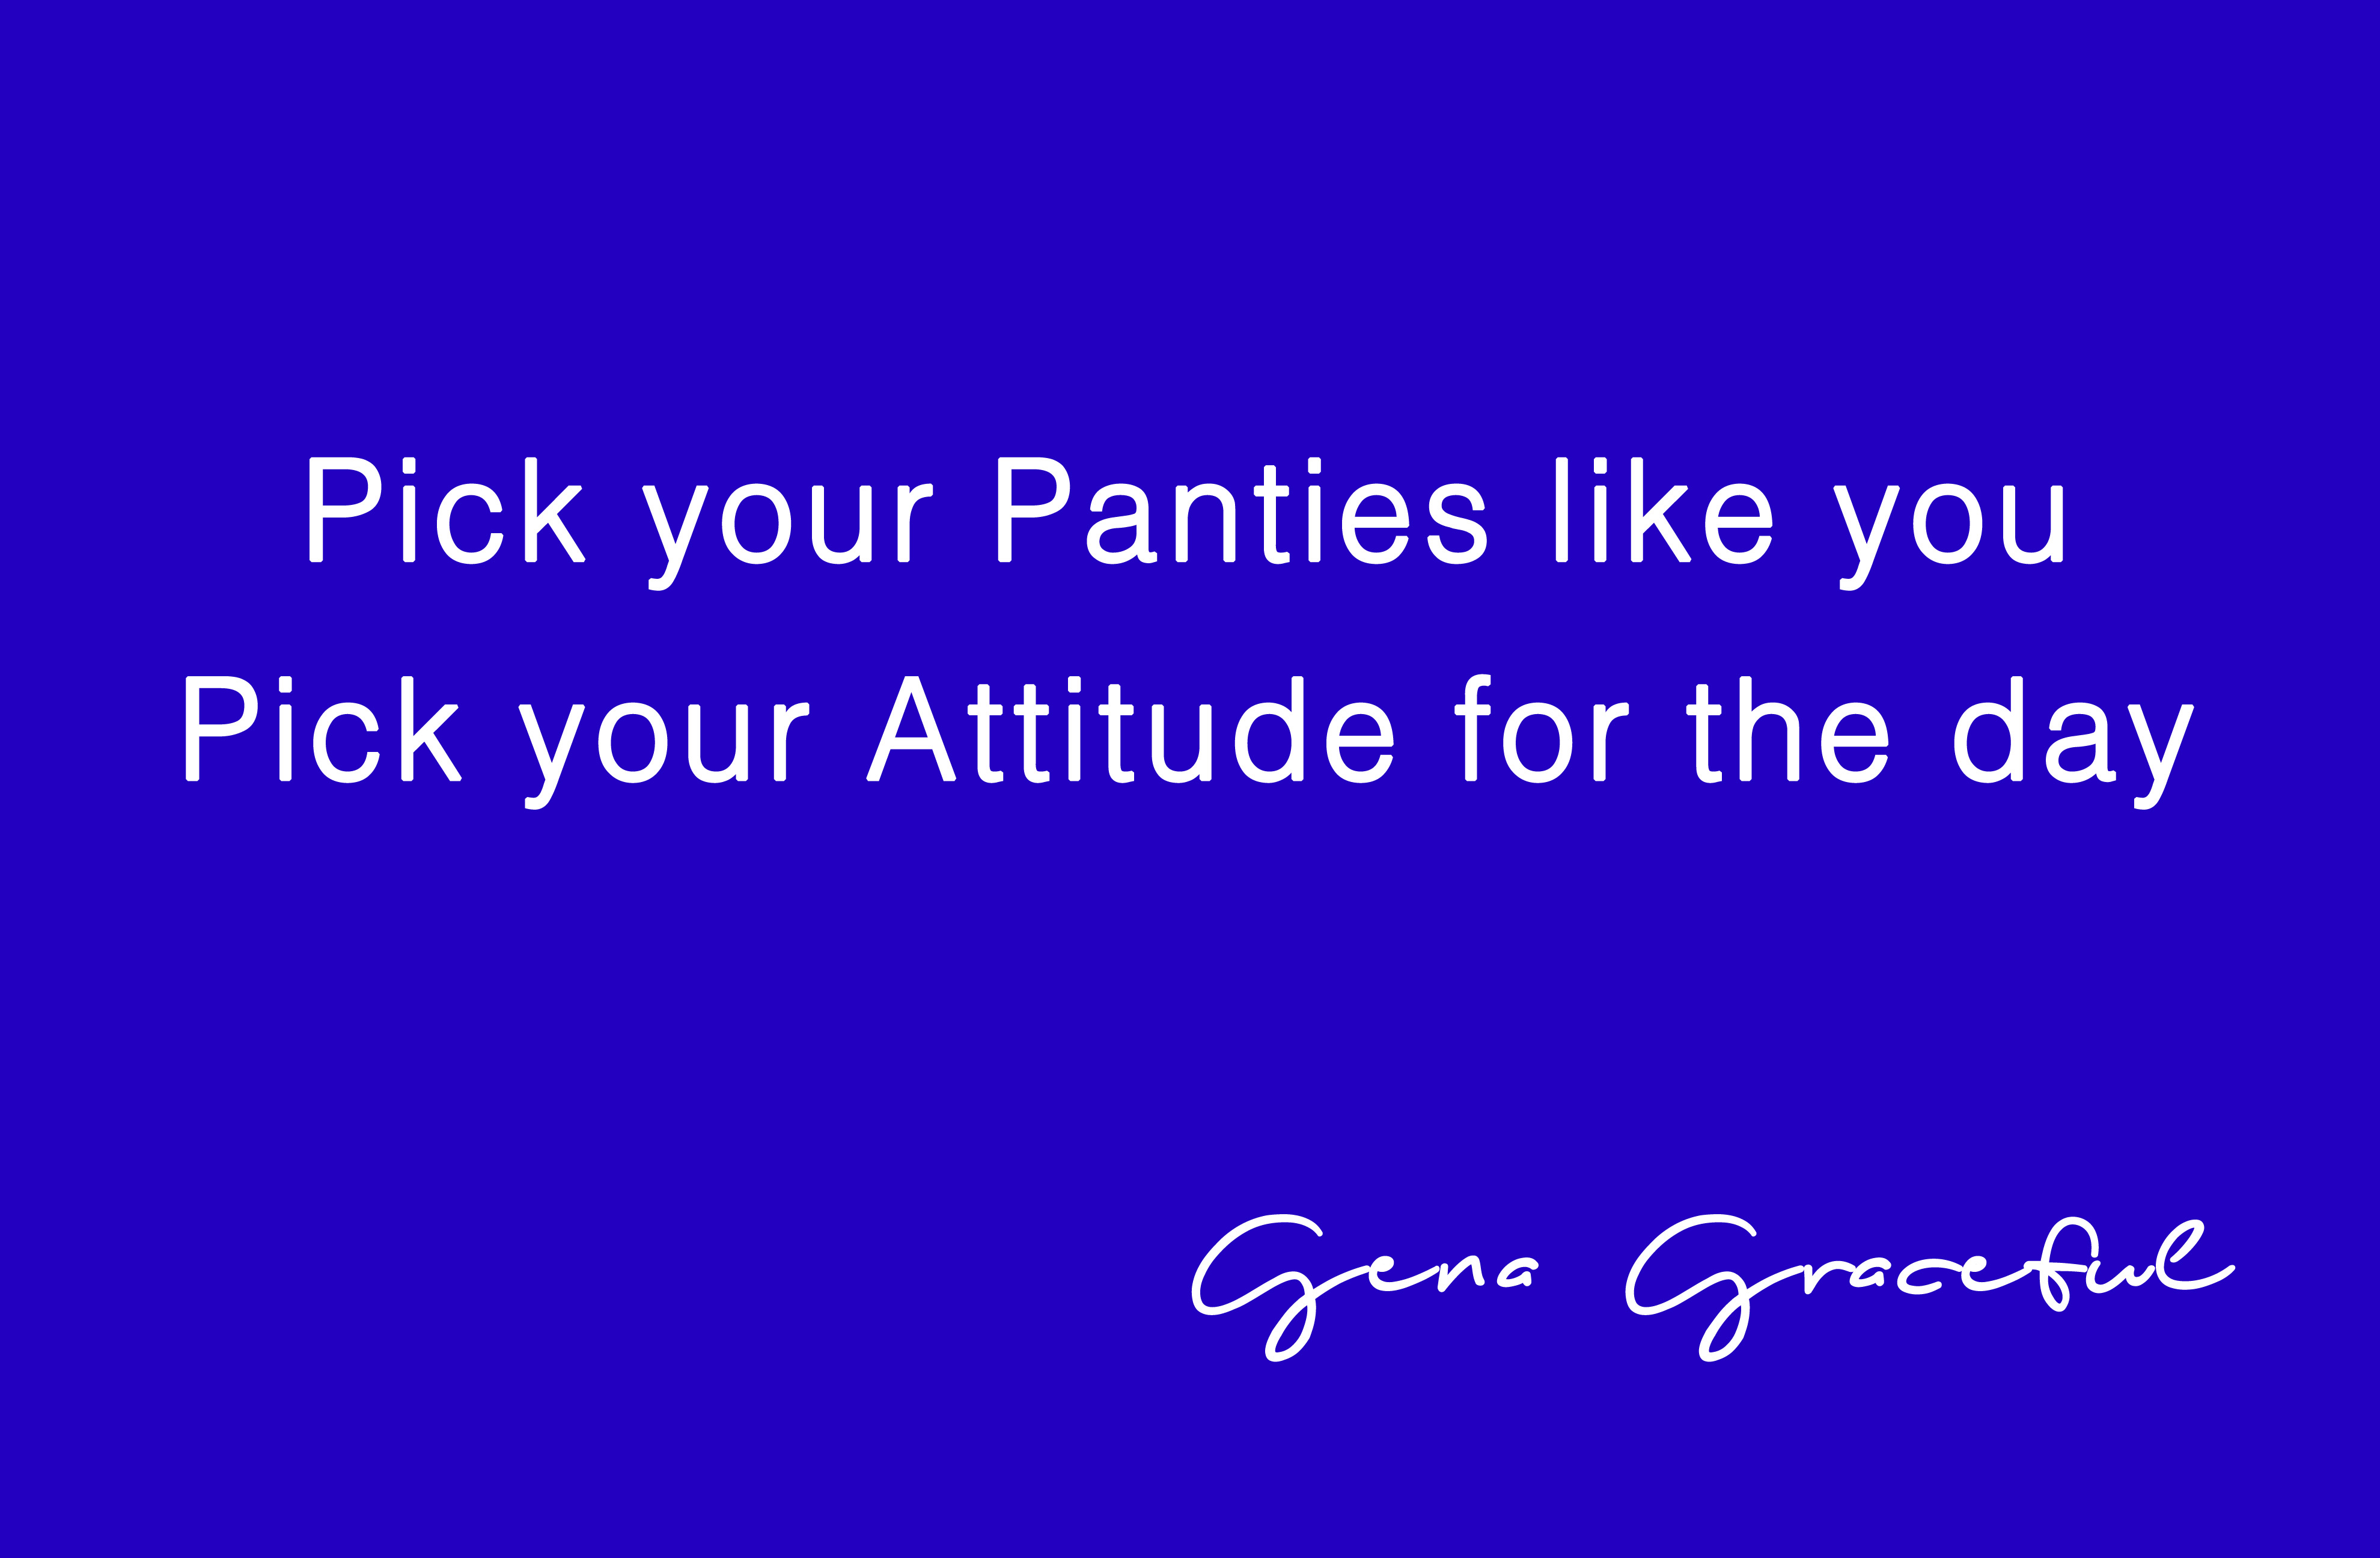 Gena Graceful - A Subscription Box of Panties with a Purpose